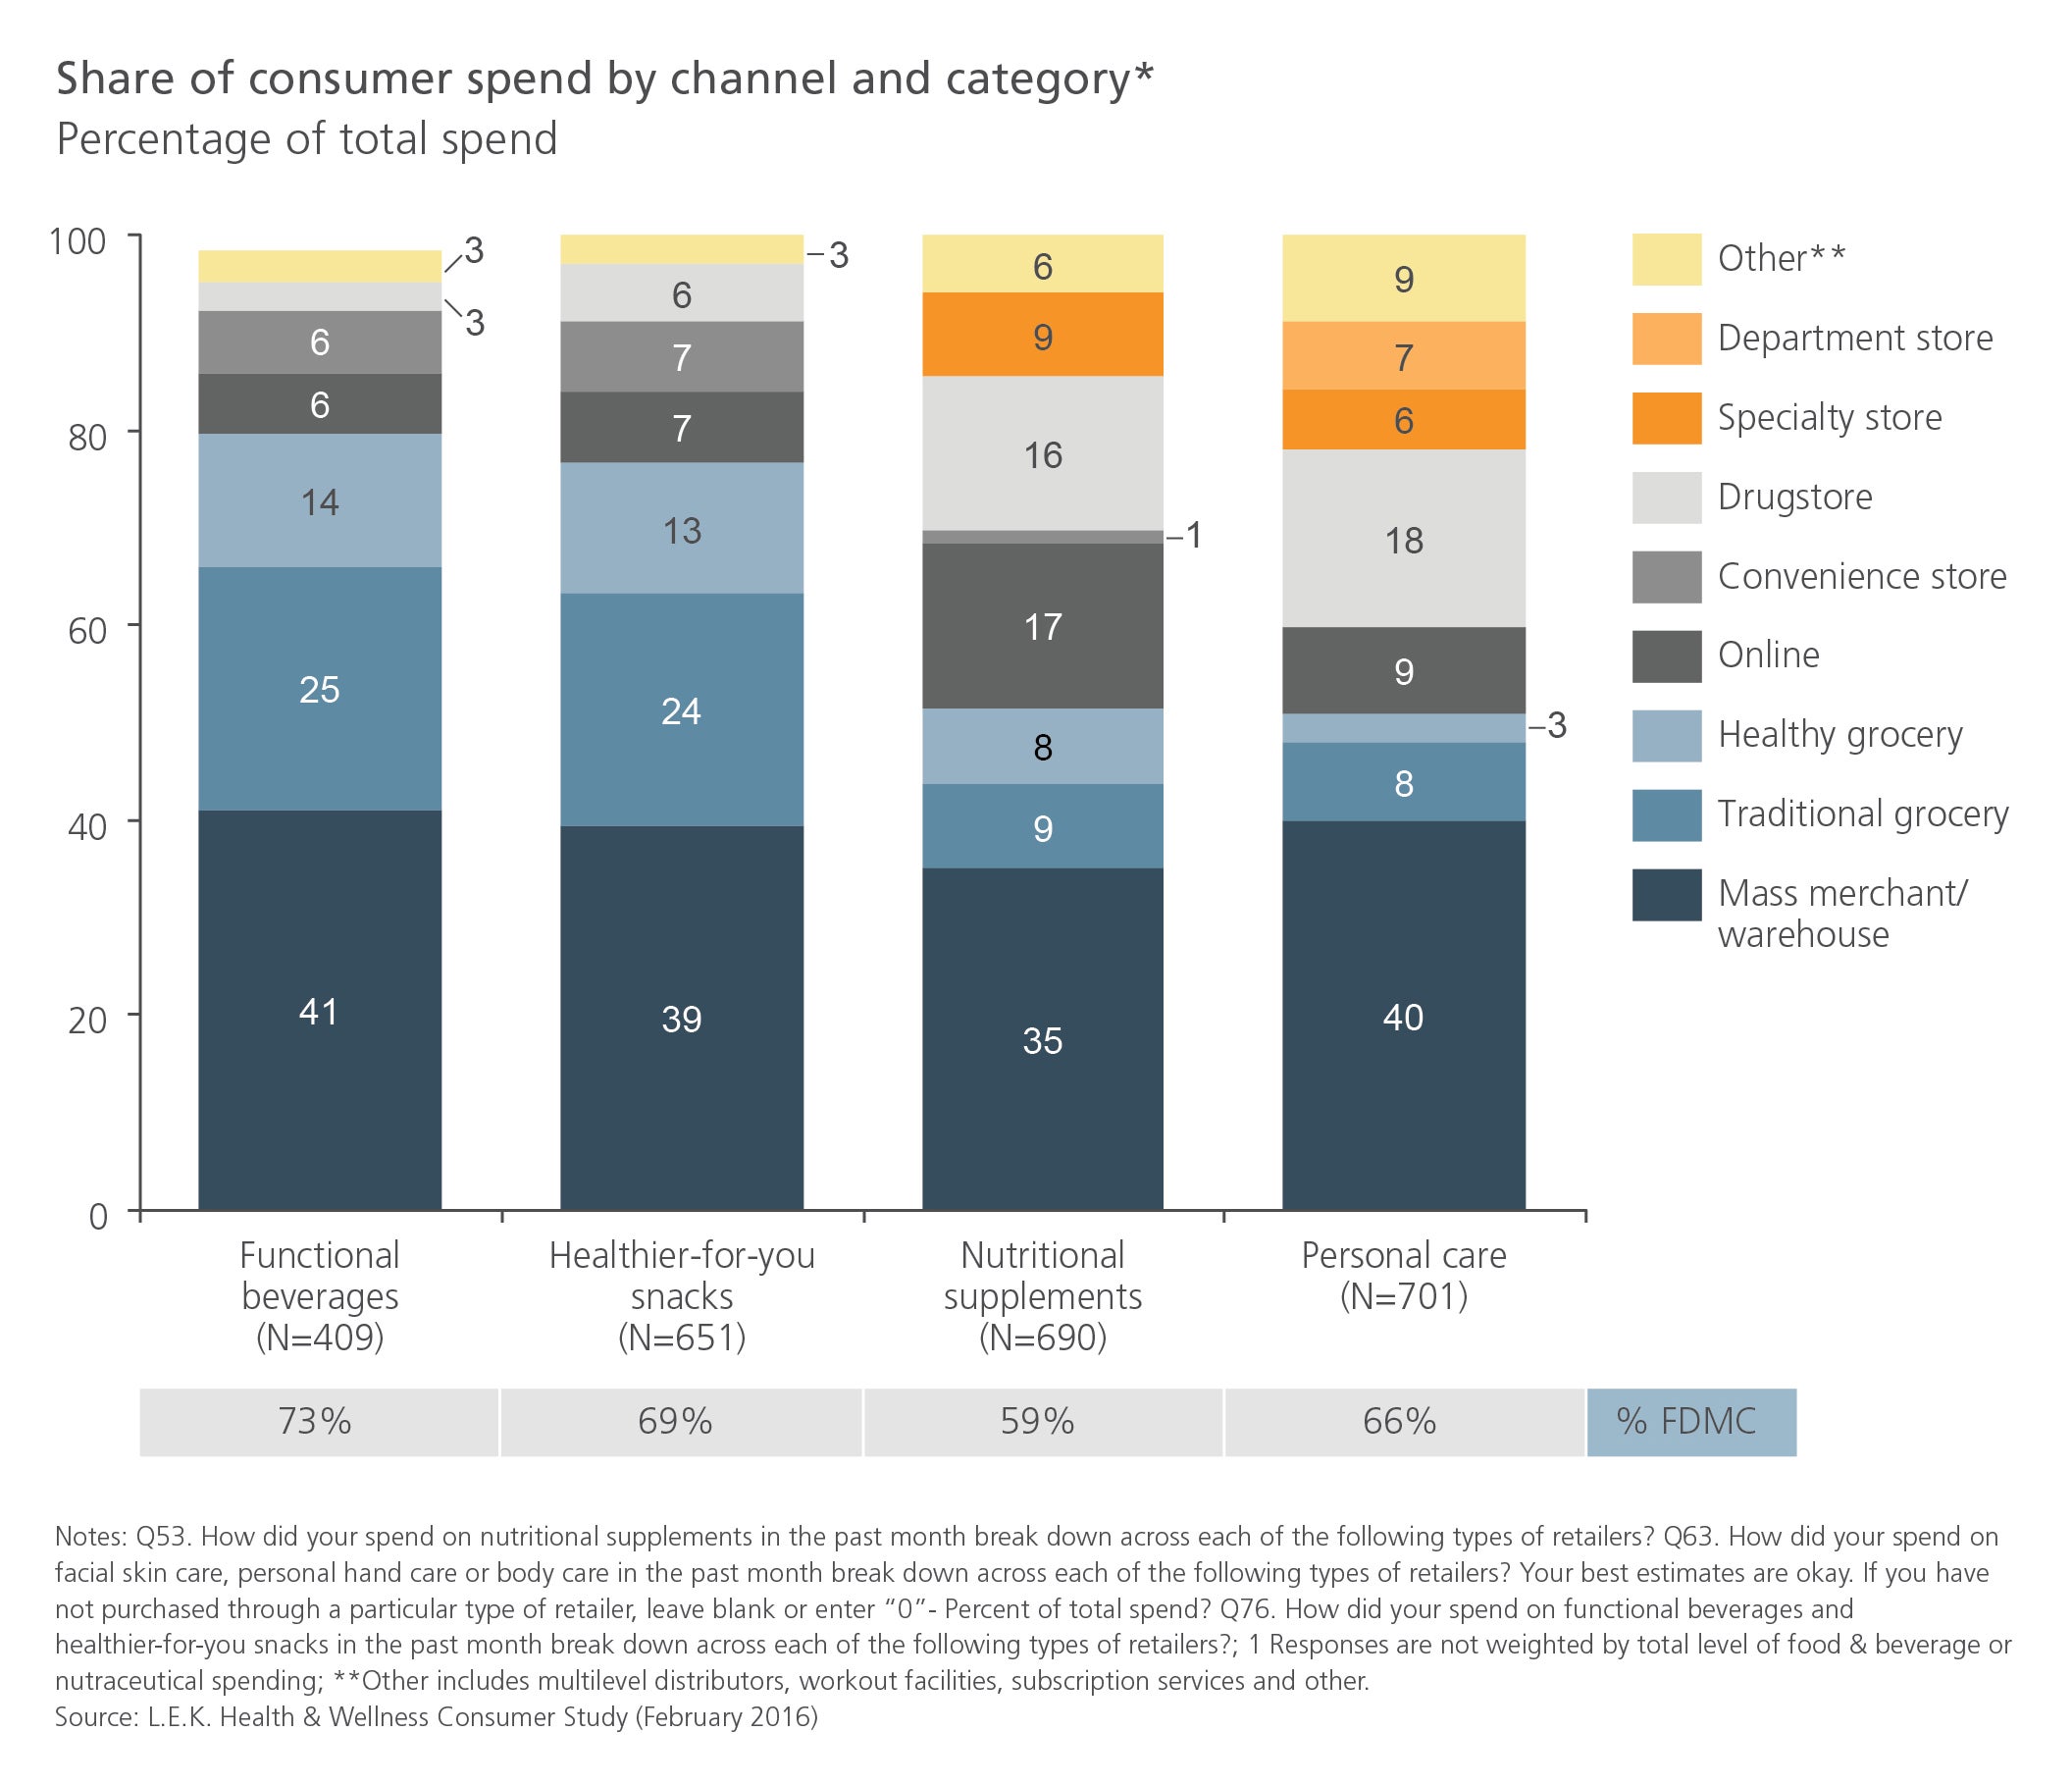 Share of consumer spend by channel and category